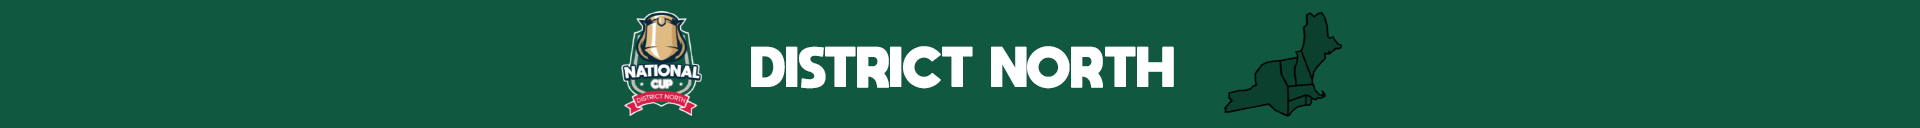 Top Banner District North